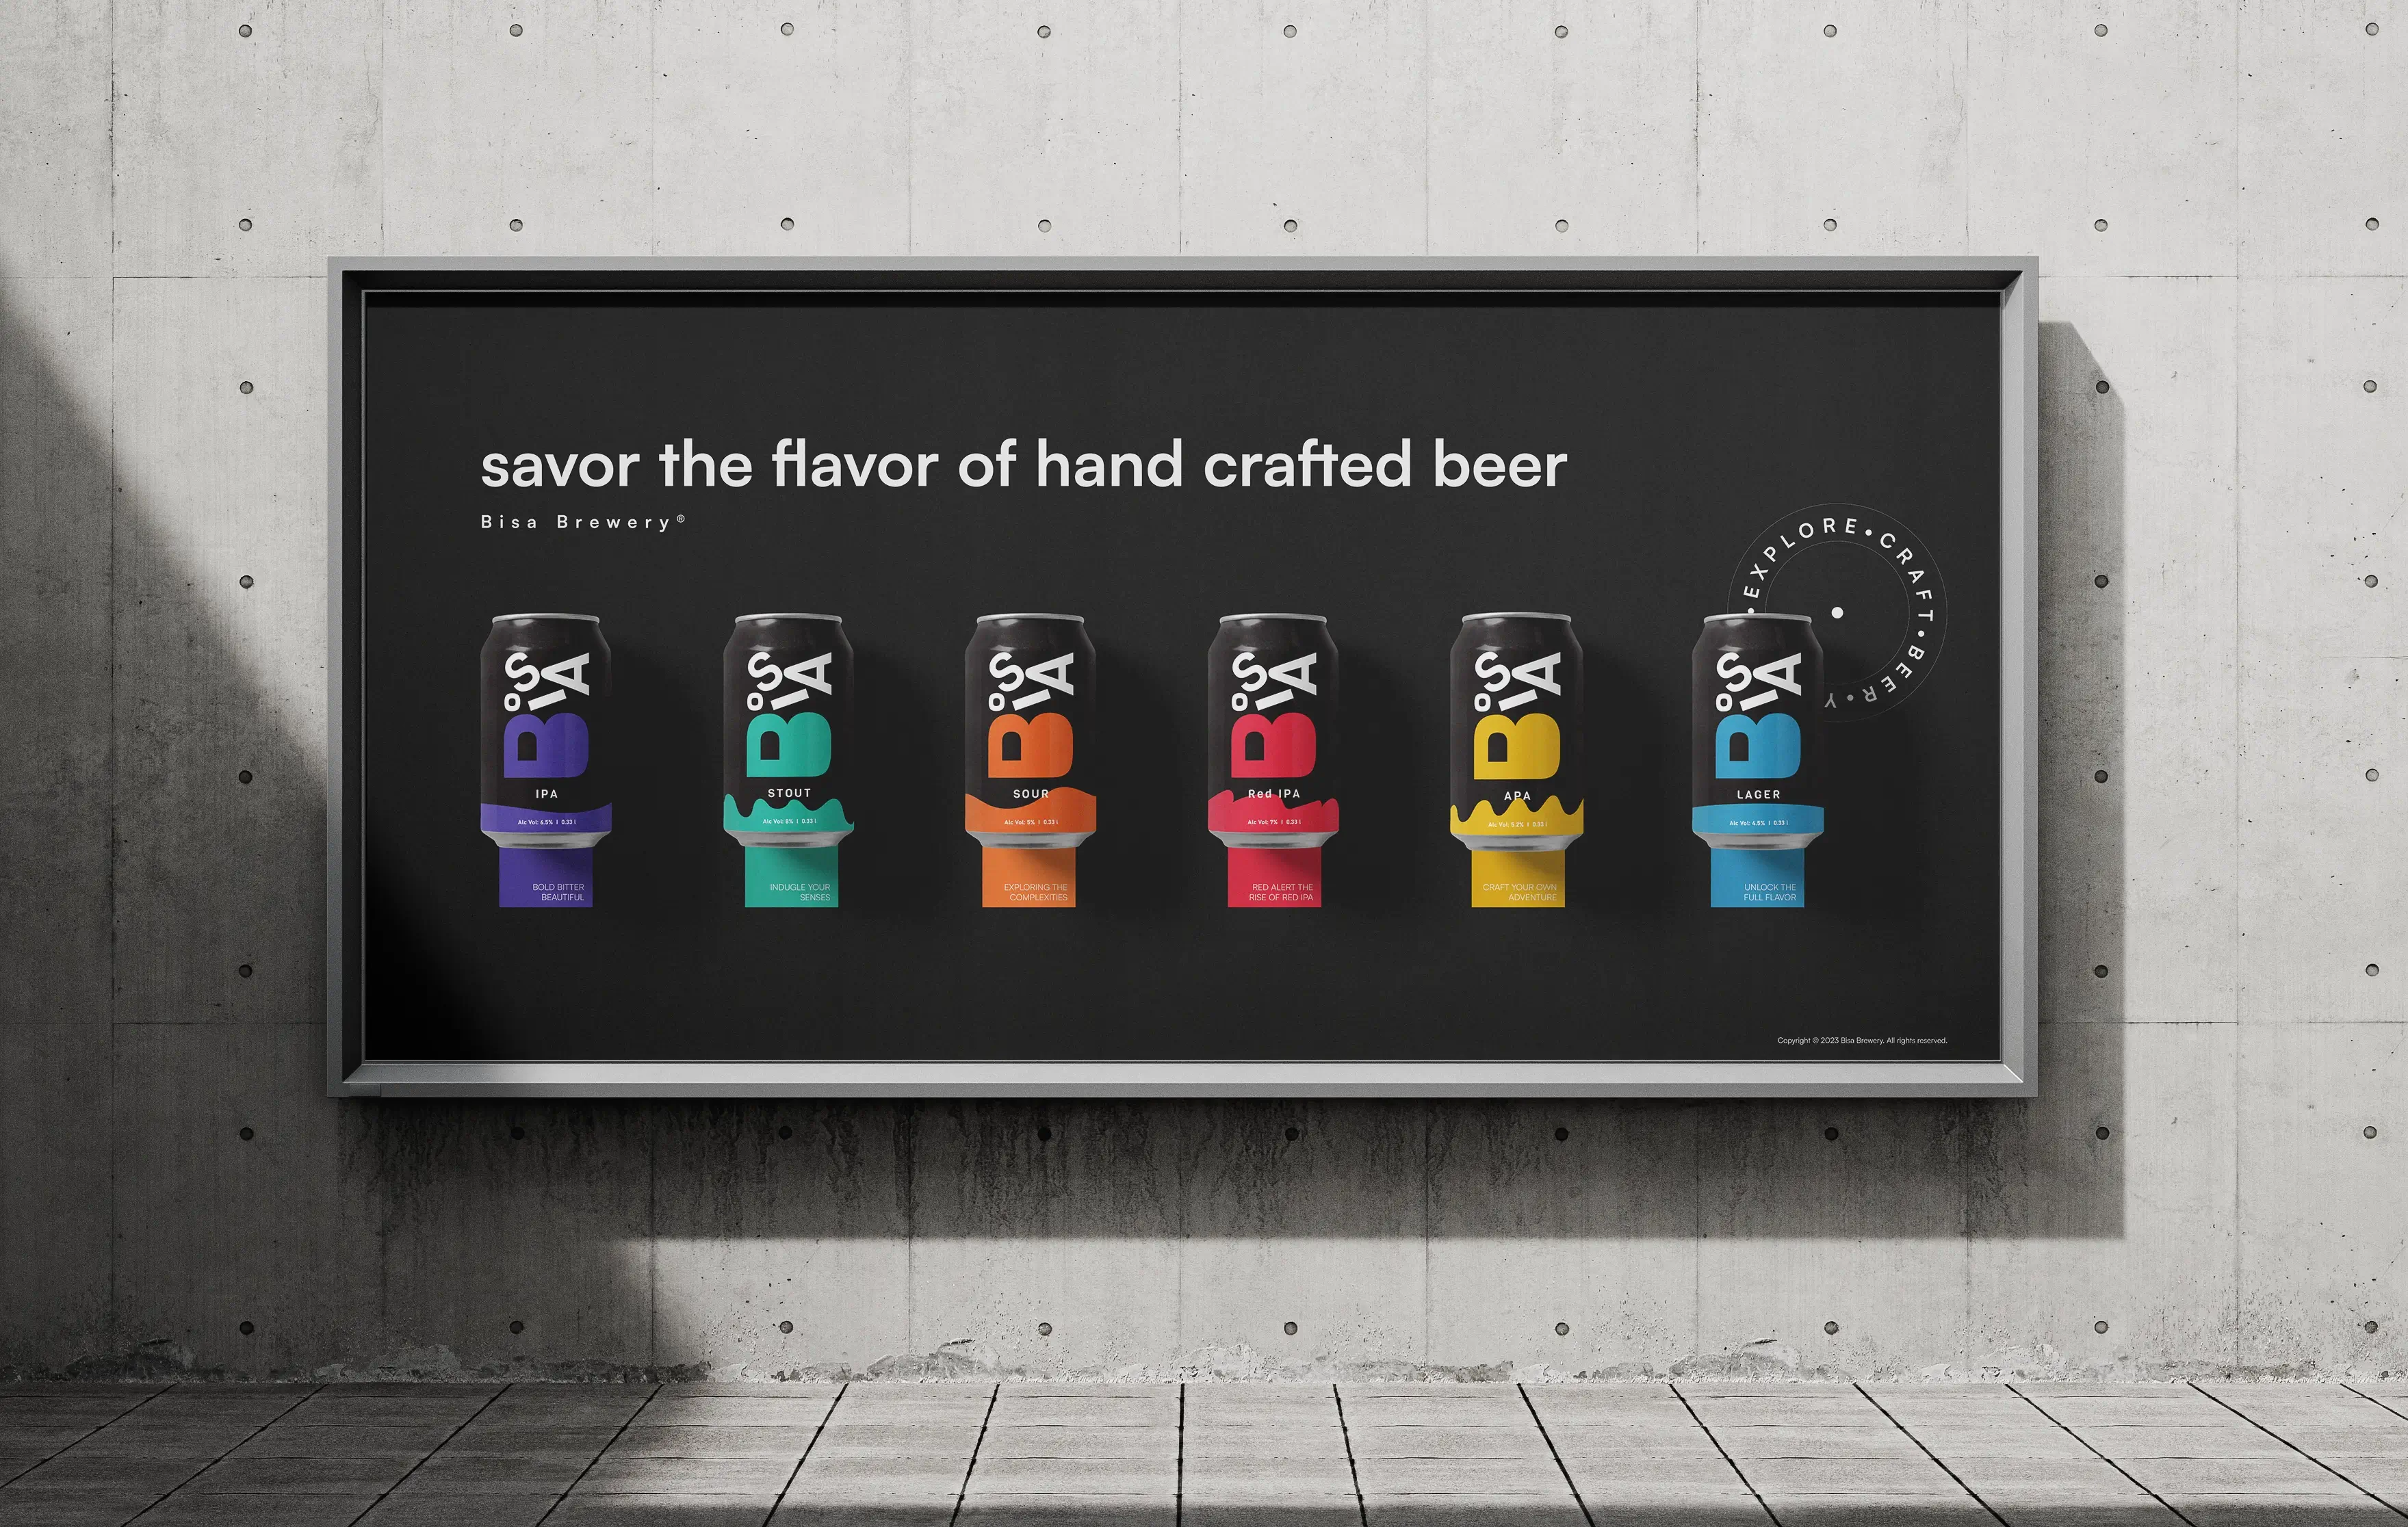 Bisa Brewery - Billboard, beer tastes, Cans in different colors - Created by Milena Stanisavljevic, Web and Graphic Designer at miletart.com